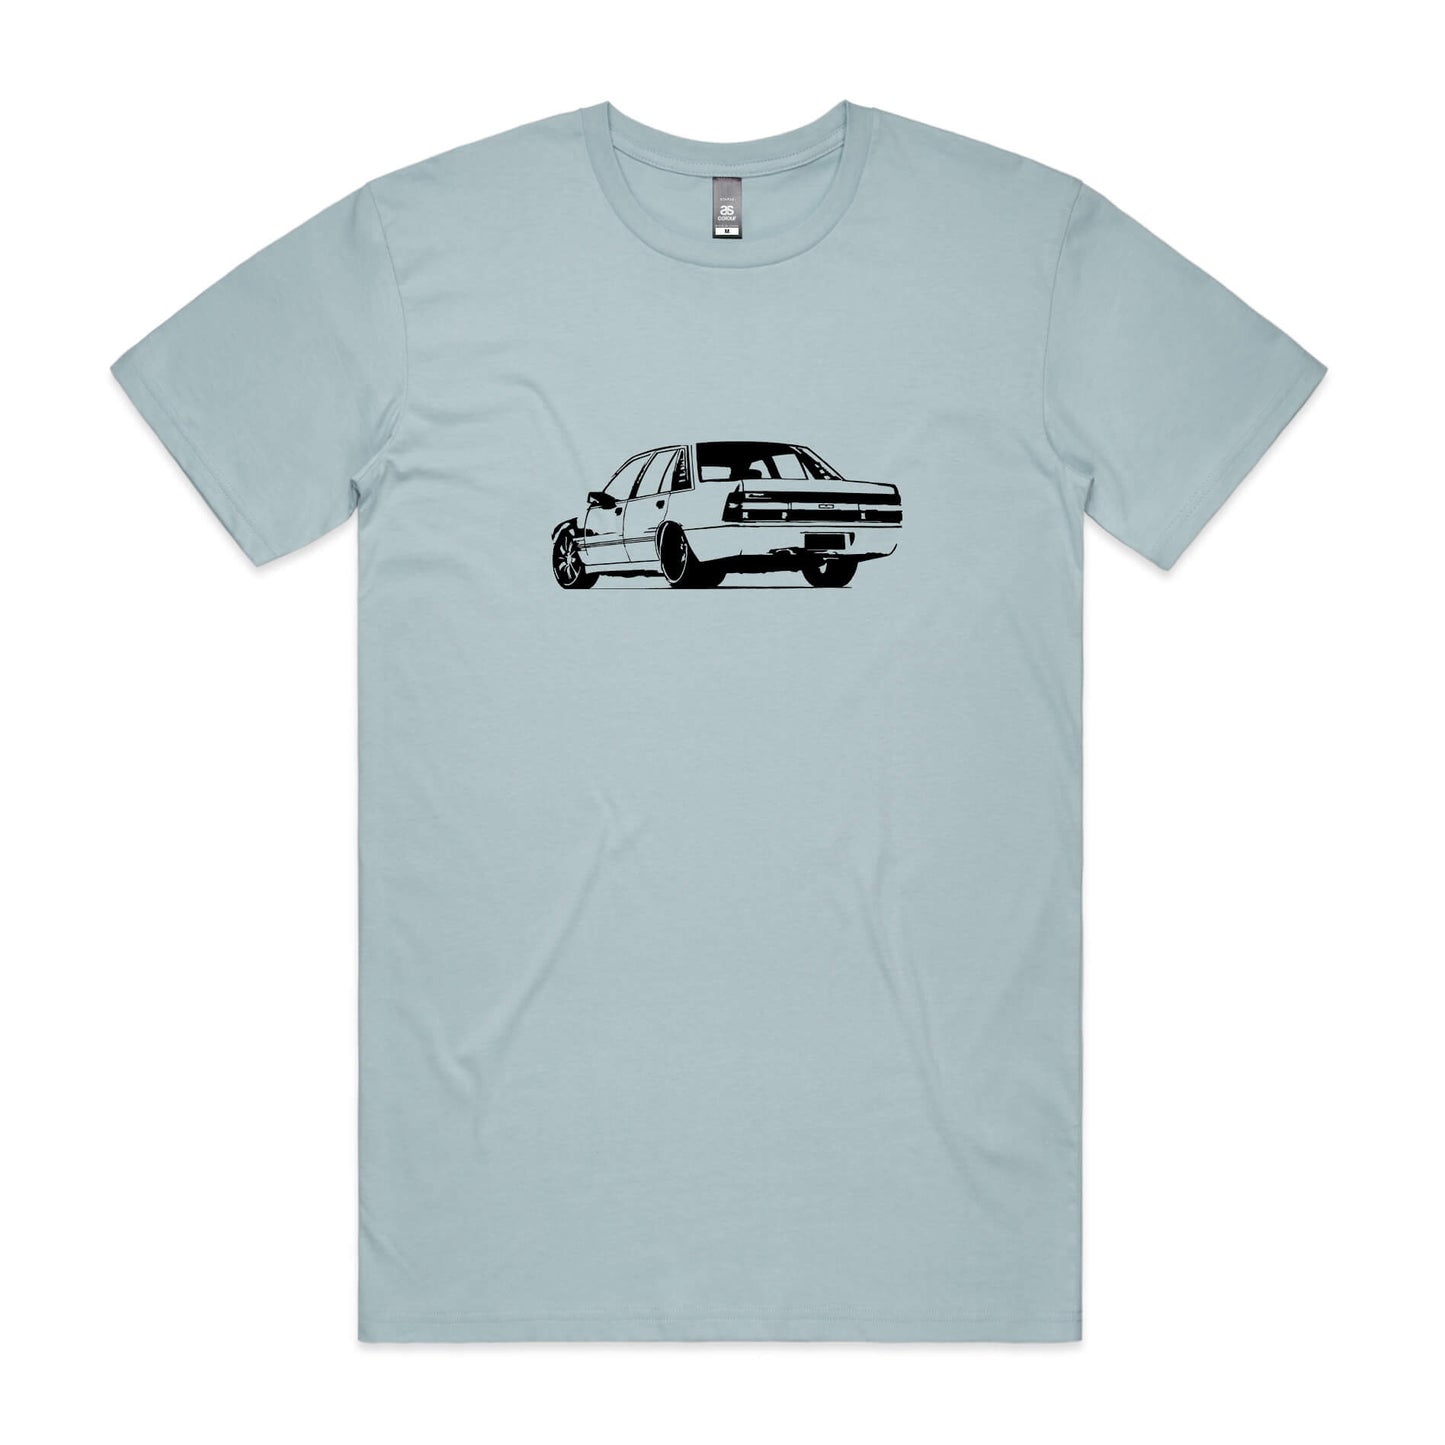 Holden VL Calais t-shirt in light blue with black Commodore car graphic